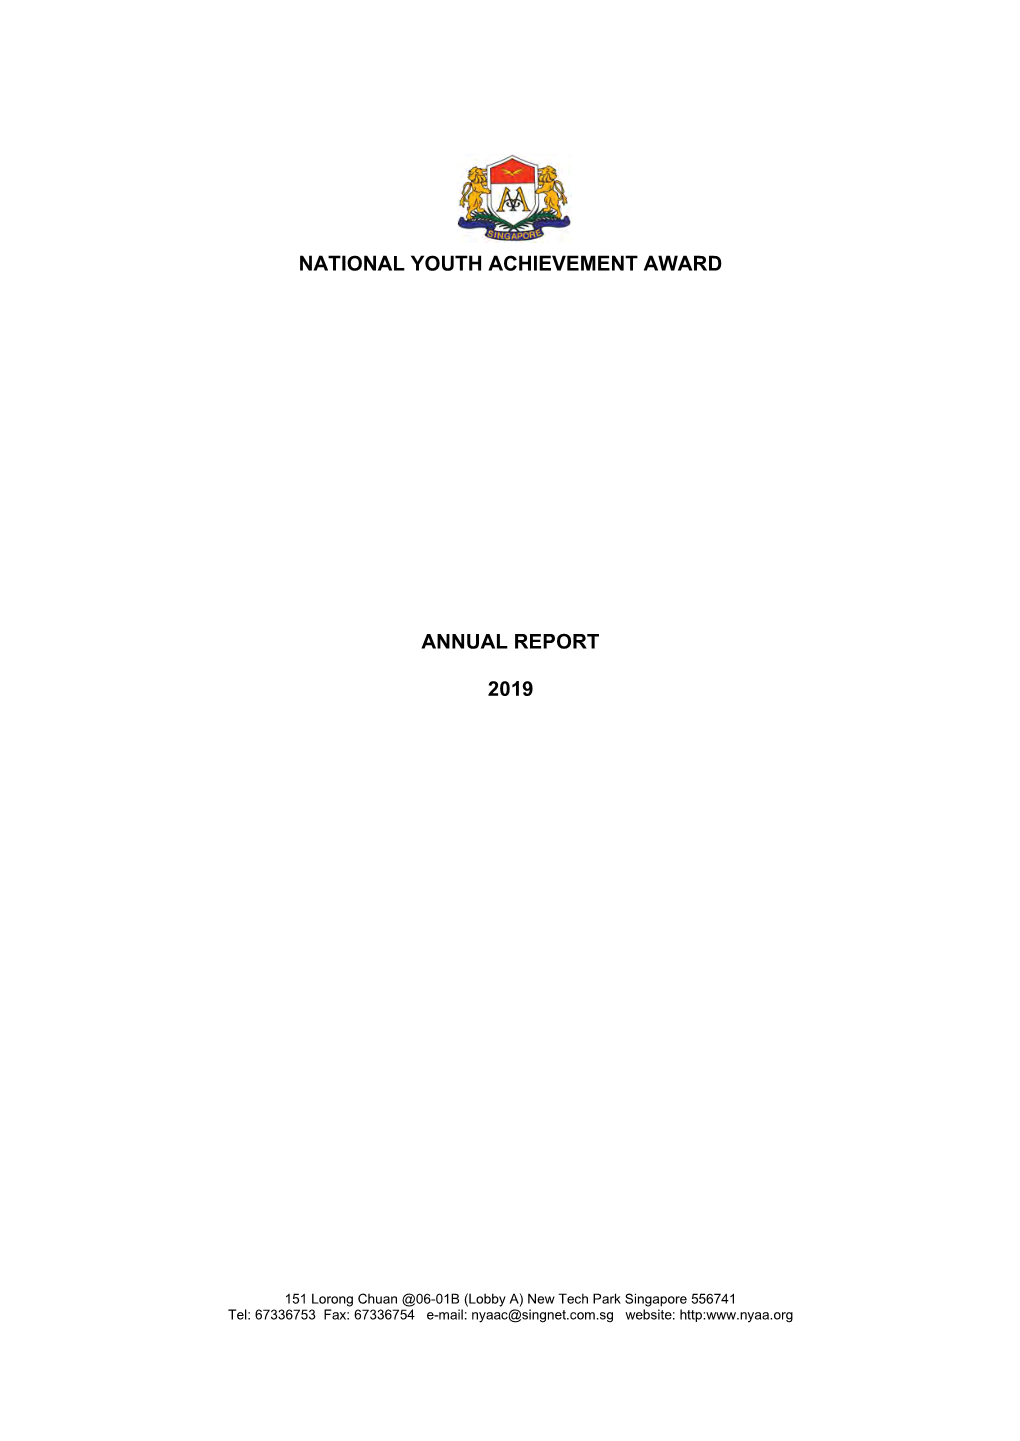 National Youth Achievement Award Association Annual Report for Year Ended 31 December 2019